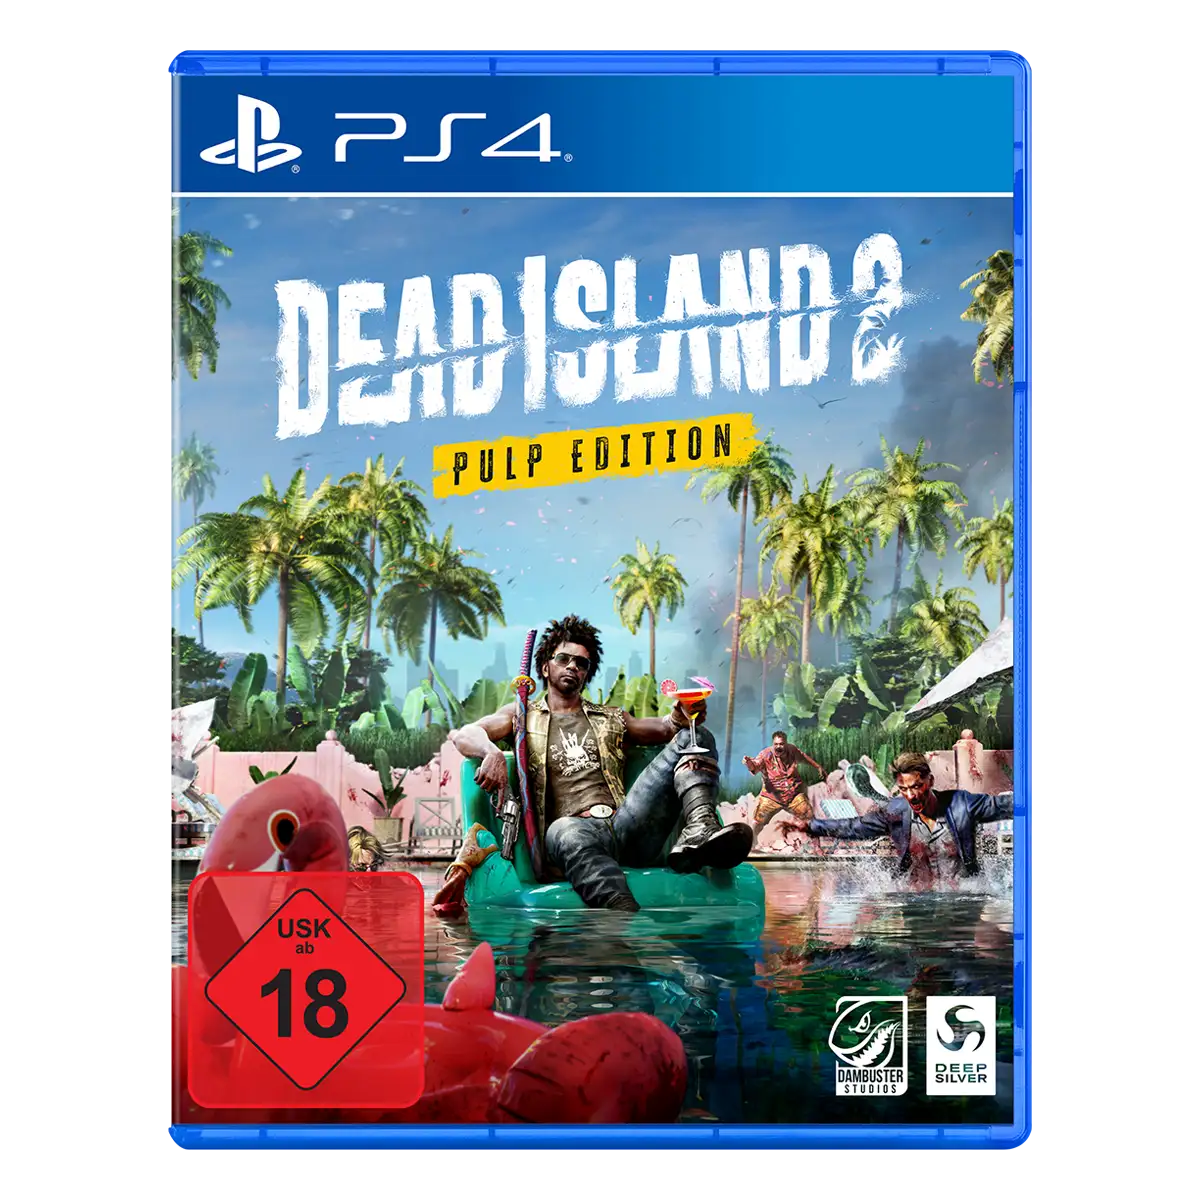 Dead Island 2 PULP Edition (PS4) (USK)